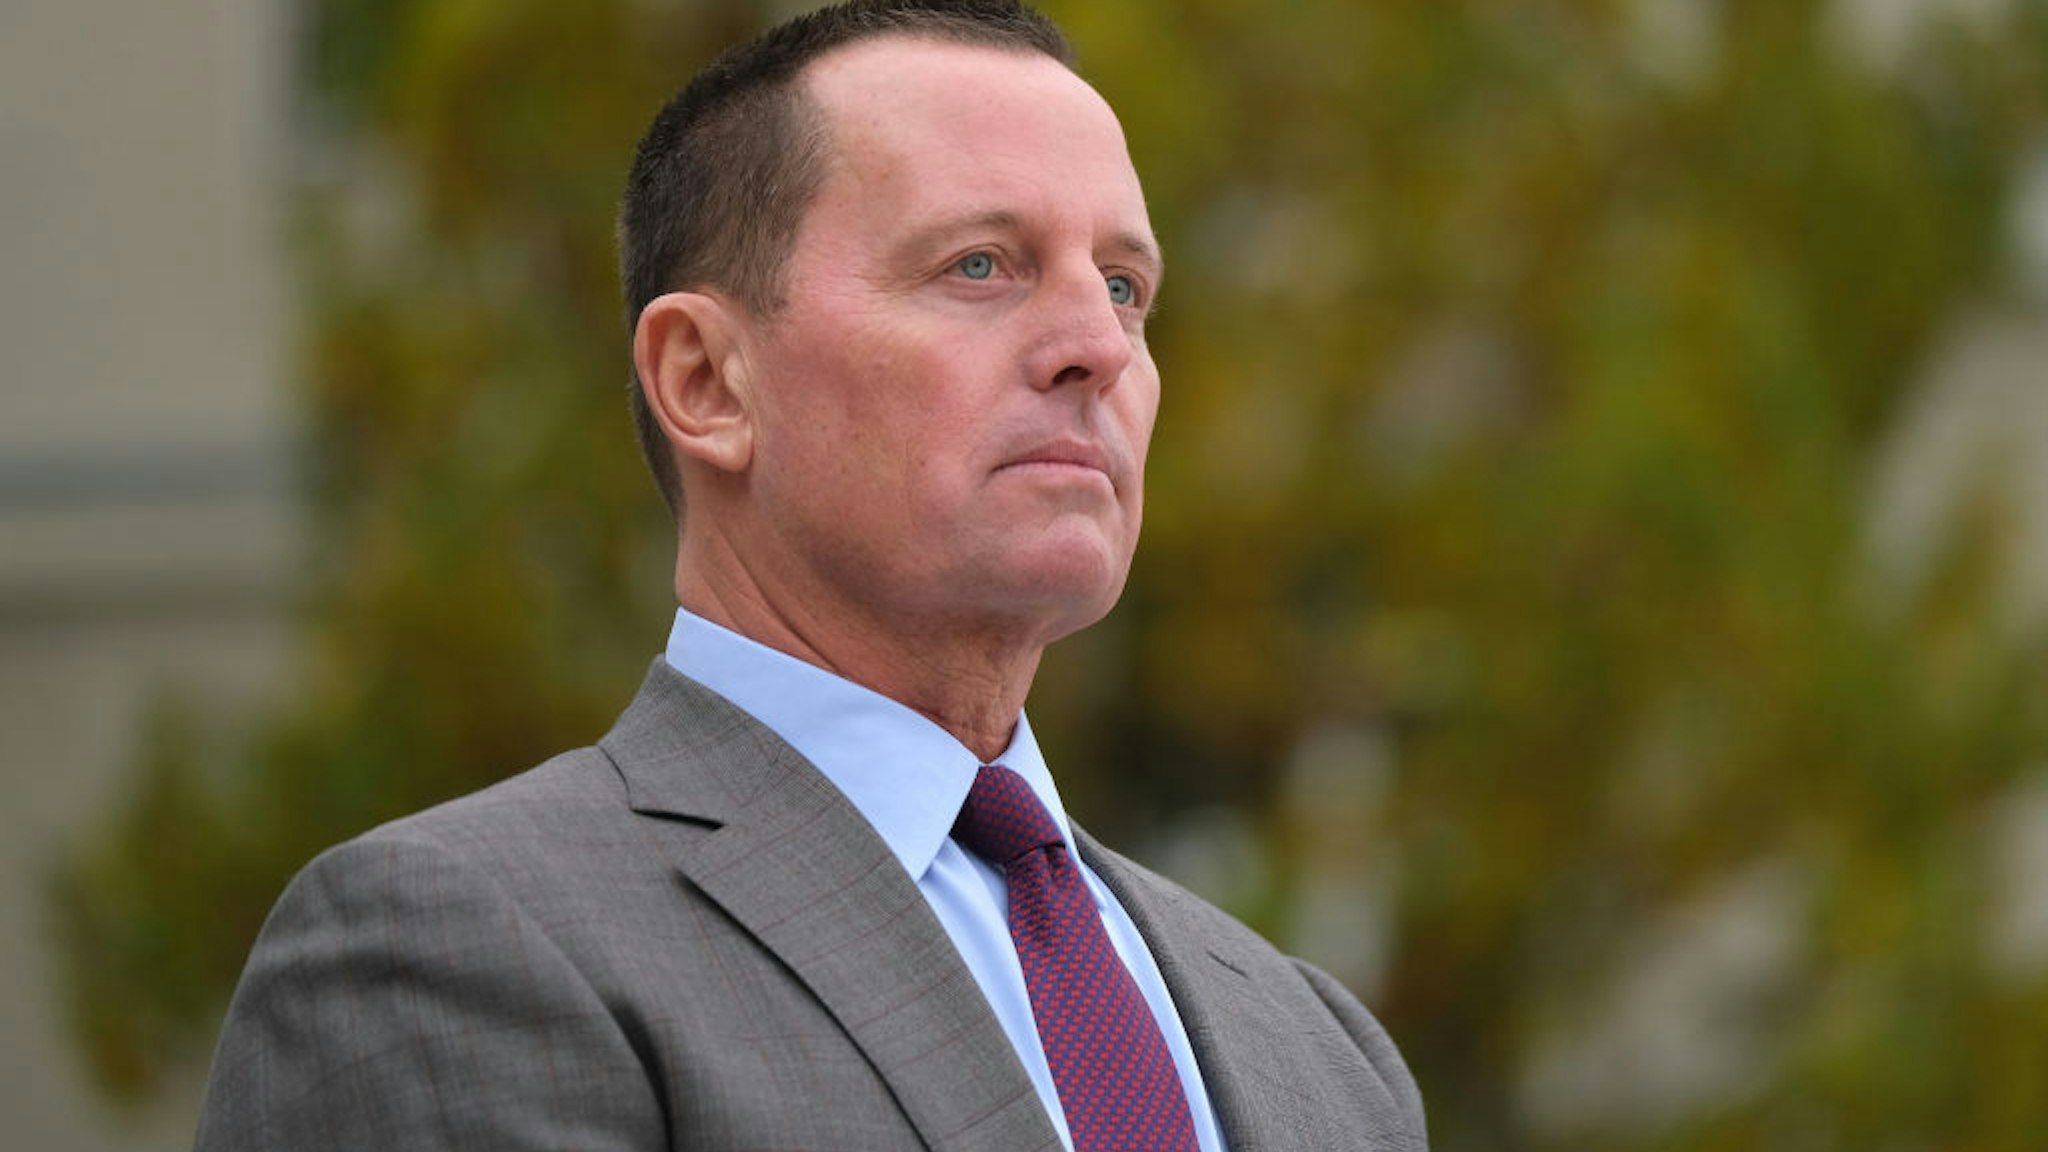 U.S. Ambassador to Germany Richard Grenell waits for the arrival of U.S. Secretary of State Mike Pompeo